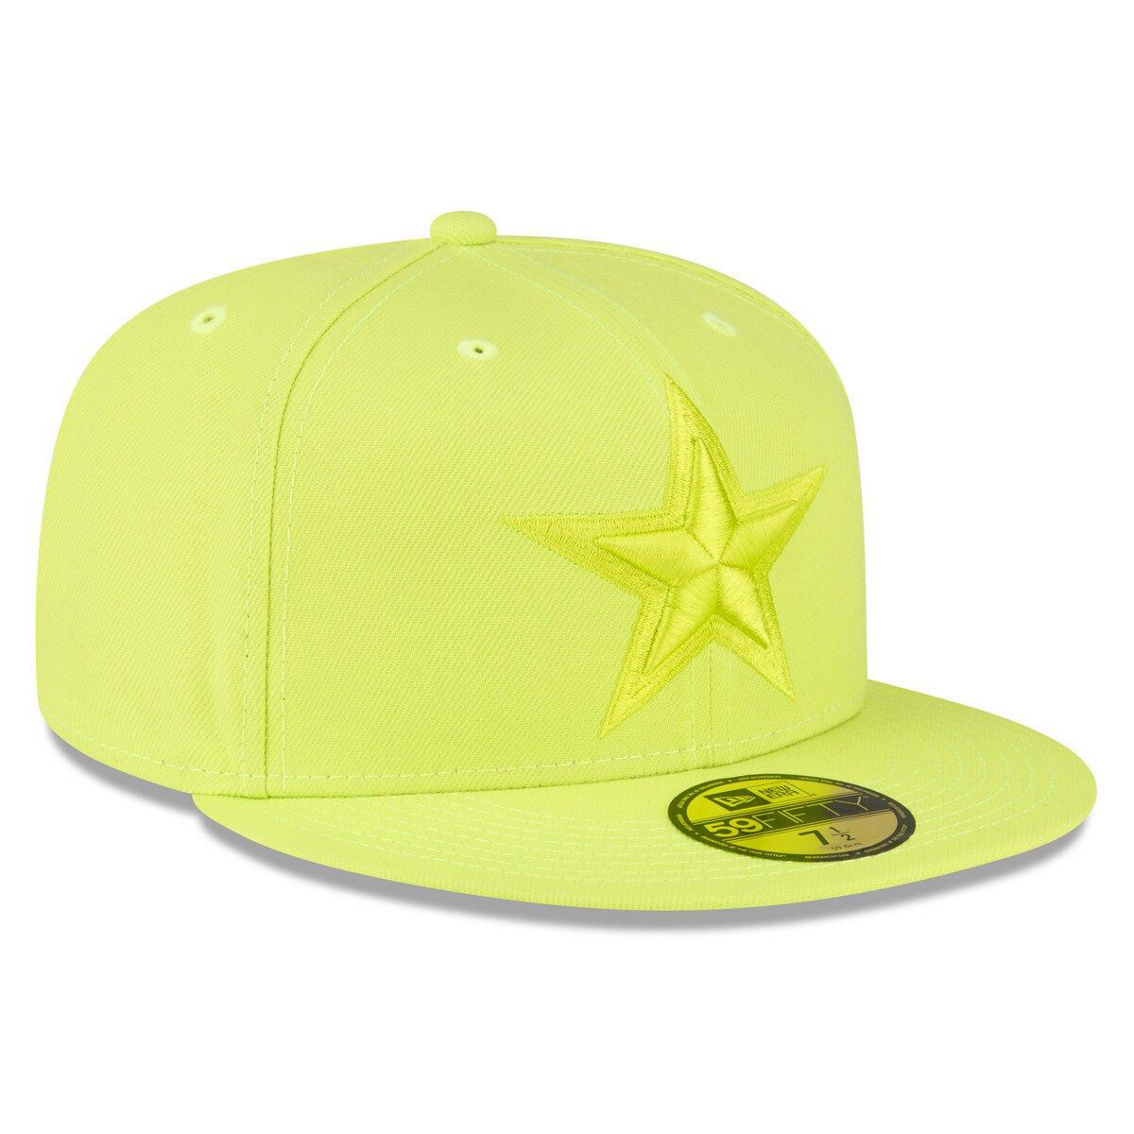 New Era Men's Neon Green Dallas Cowboys Color Pack Brights 59FIFTY Fitted Hat - Image 4 of 4